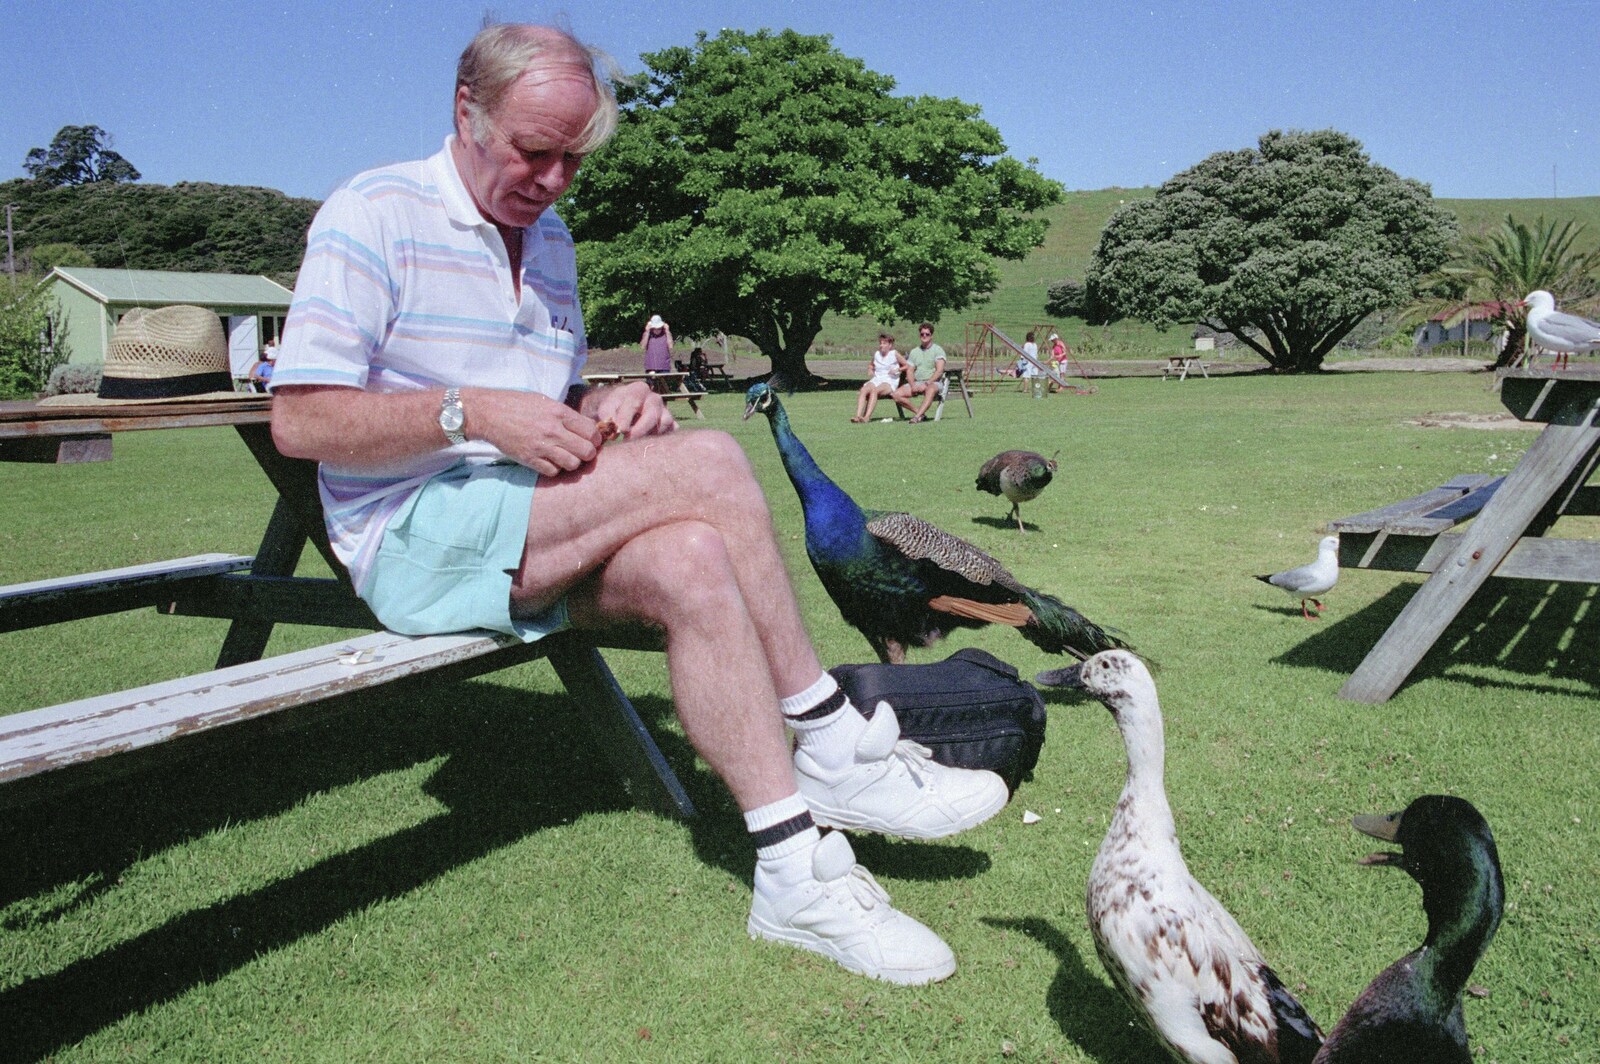 The Old Chap feeds peacocks and ducks from The Bay Of Islands, New Zealand - 29th November 1992